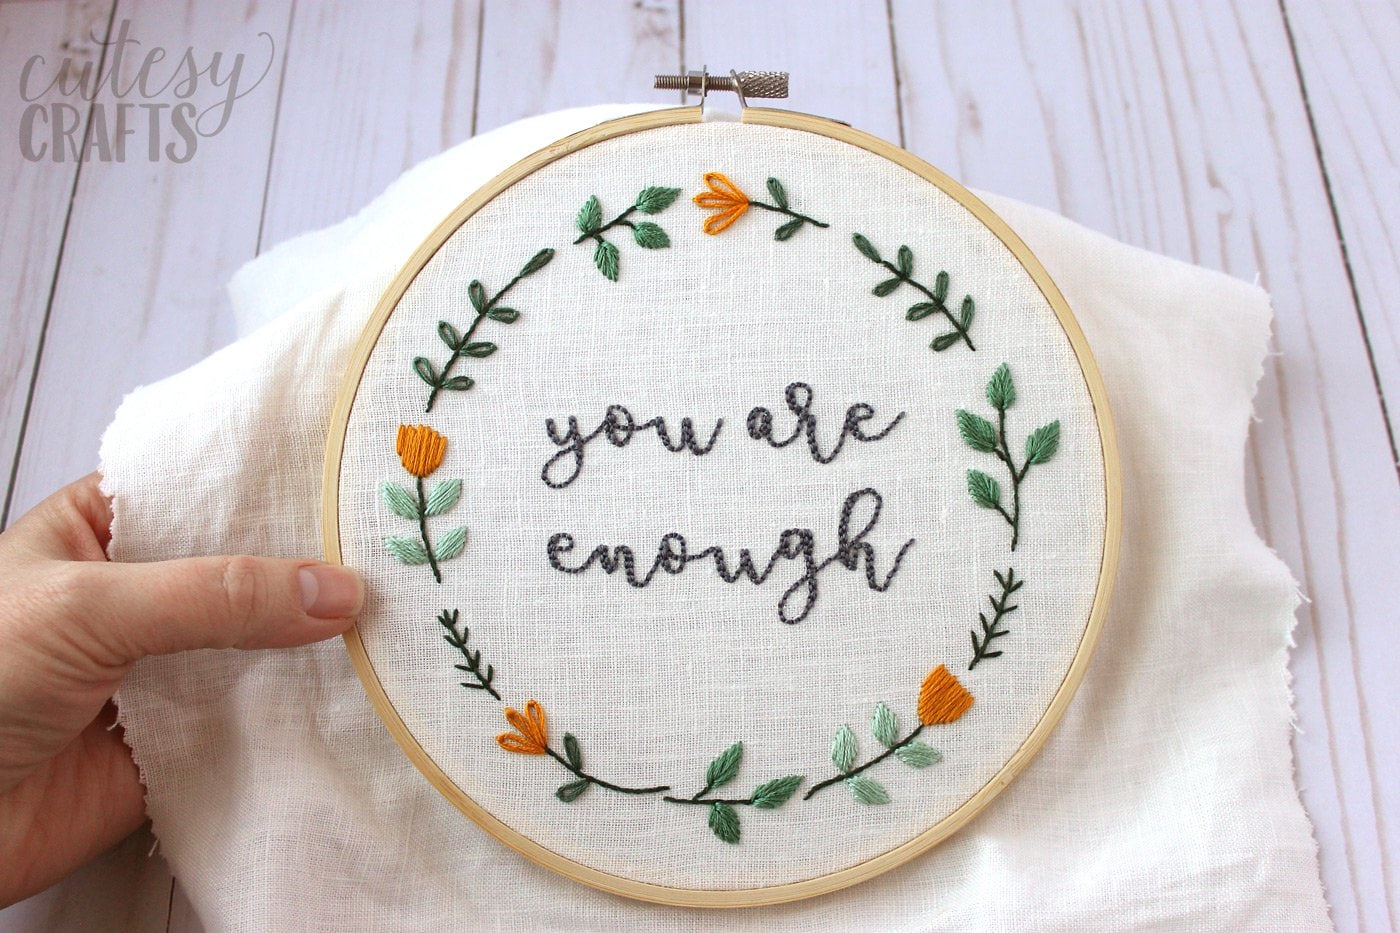 Free Embroidery Pattern You Are Enough Free Hand Embroidery Pattern The Polka Dot Chair